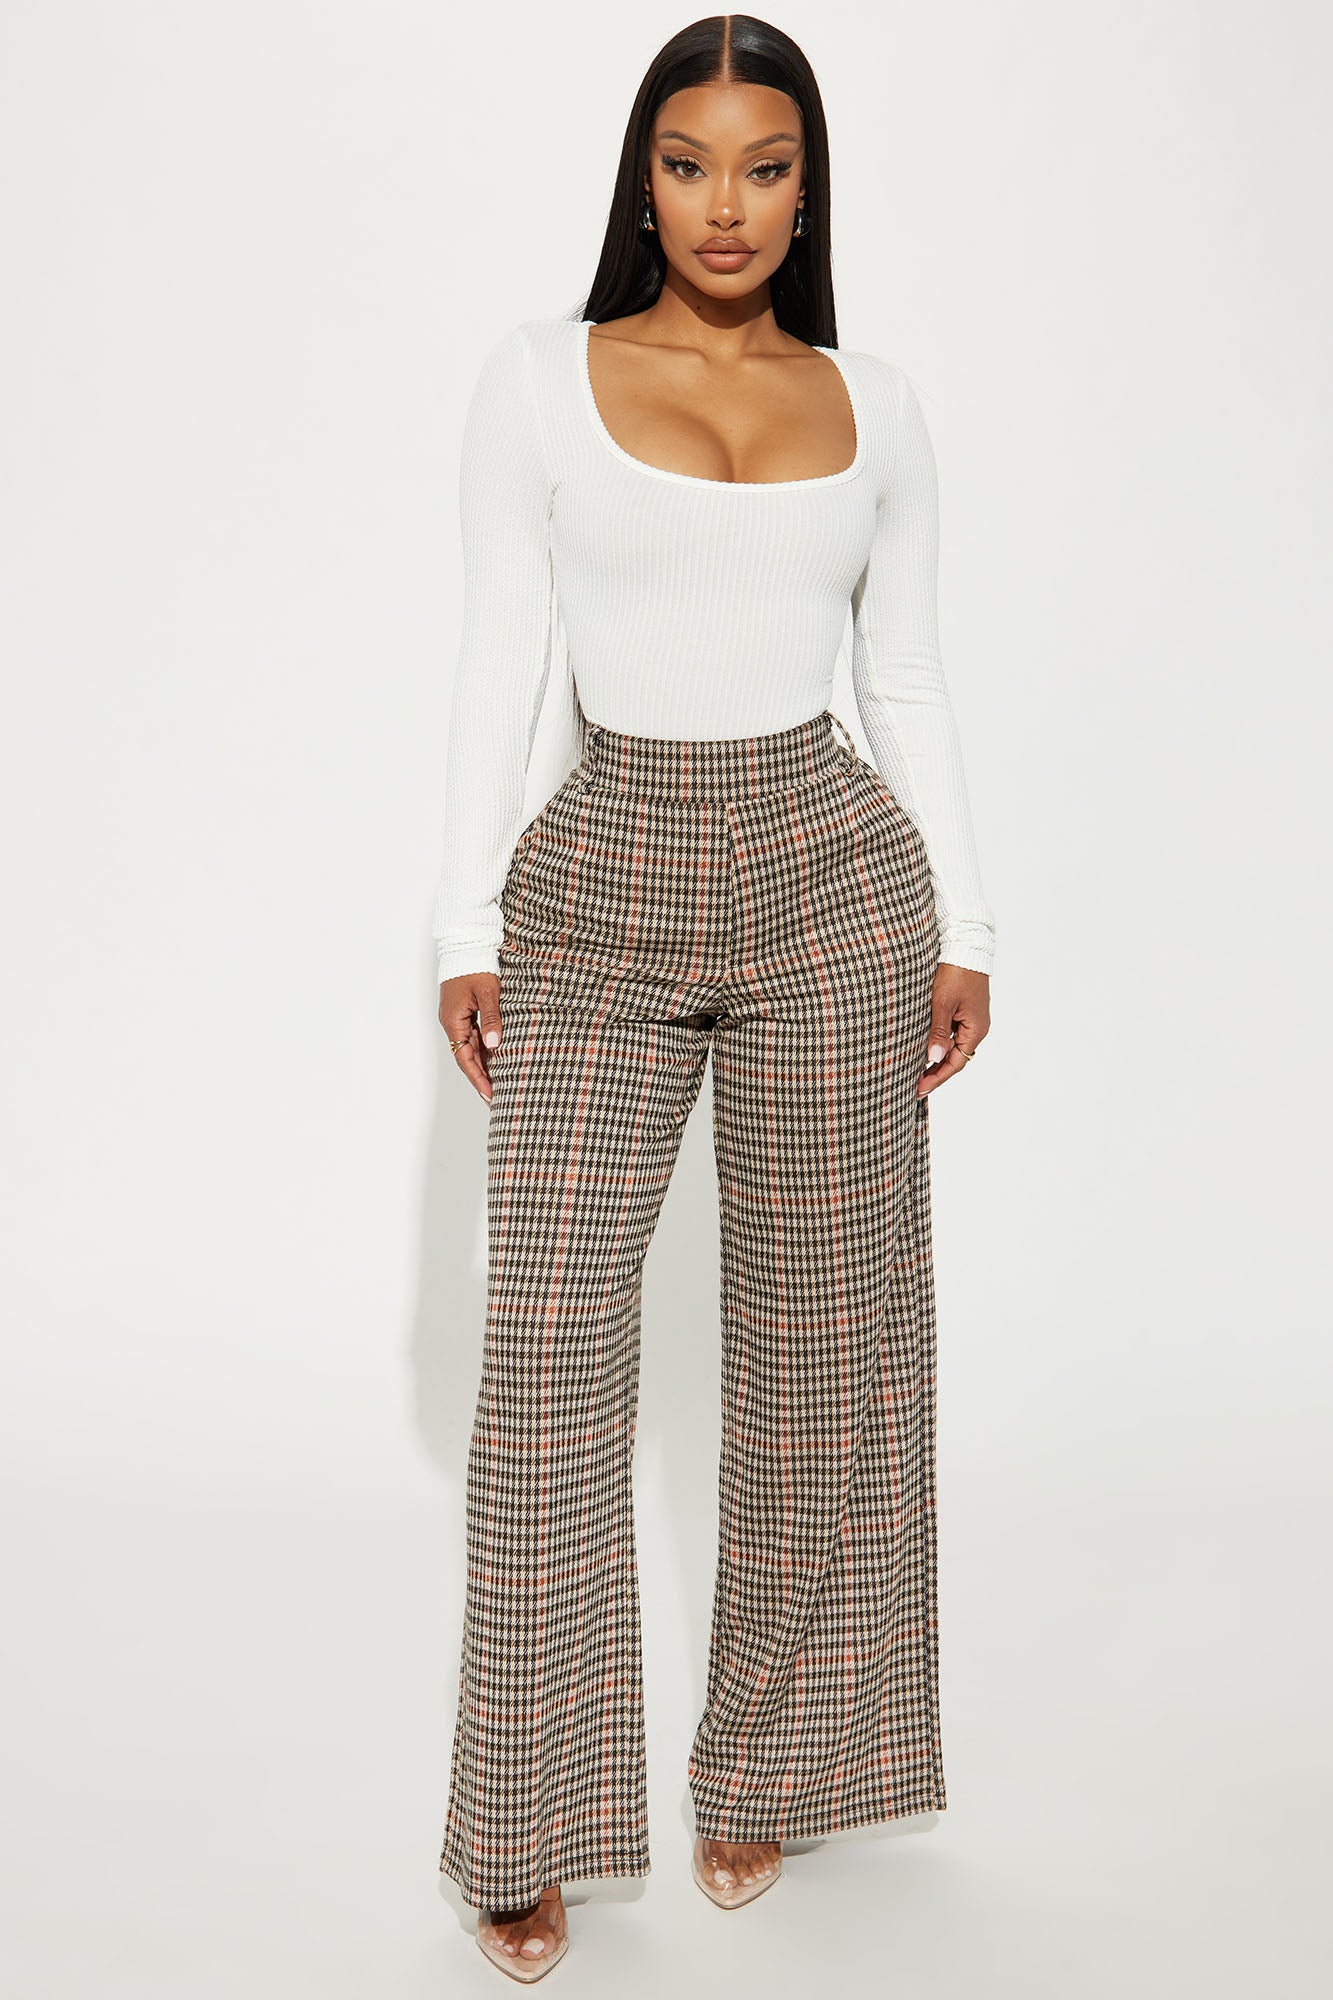 Cato Fashions | Cato Plus Petite Houndstooth Faux Leather Trim Pants